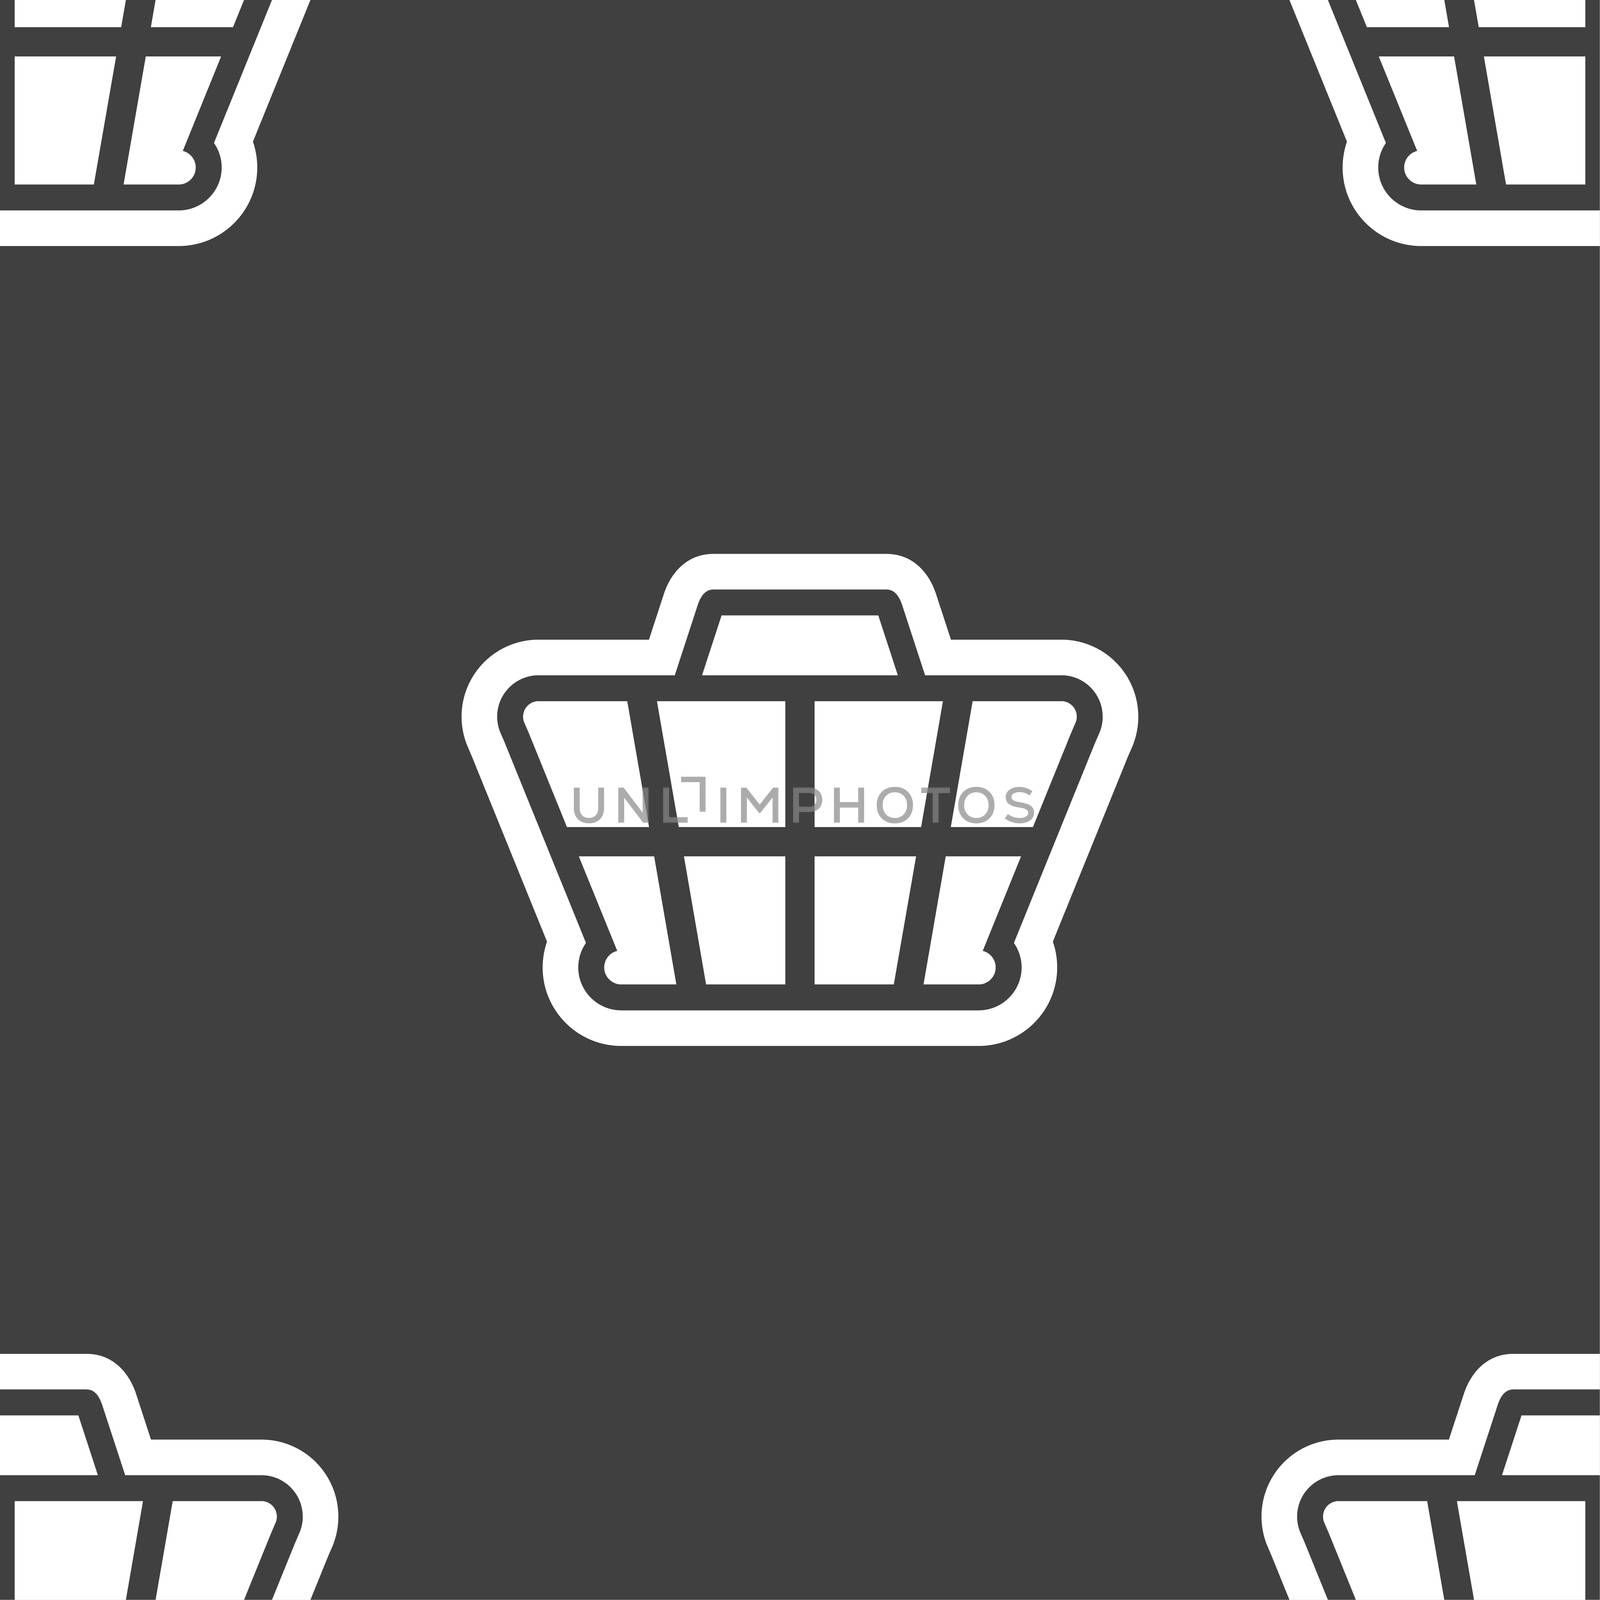 Shopping Cart icon sign. Seamless pattern on a gray background. illustration